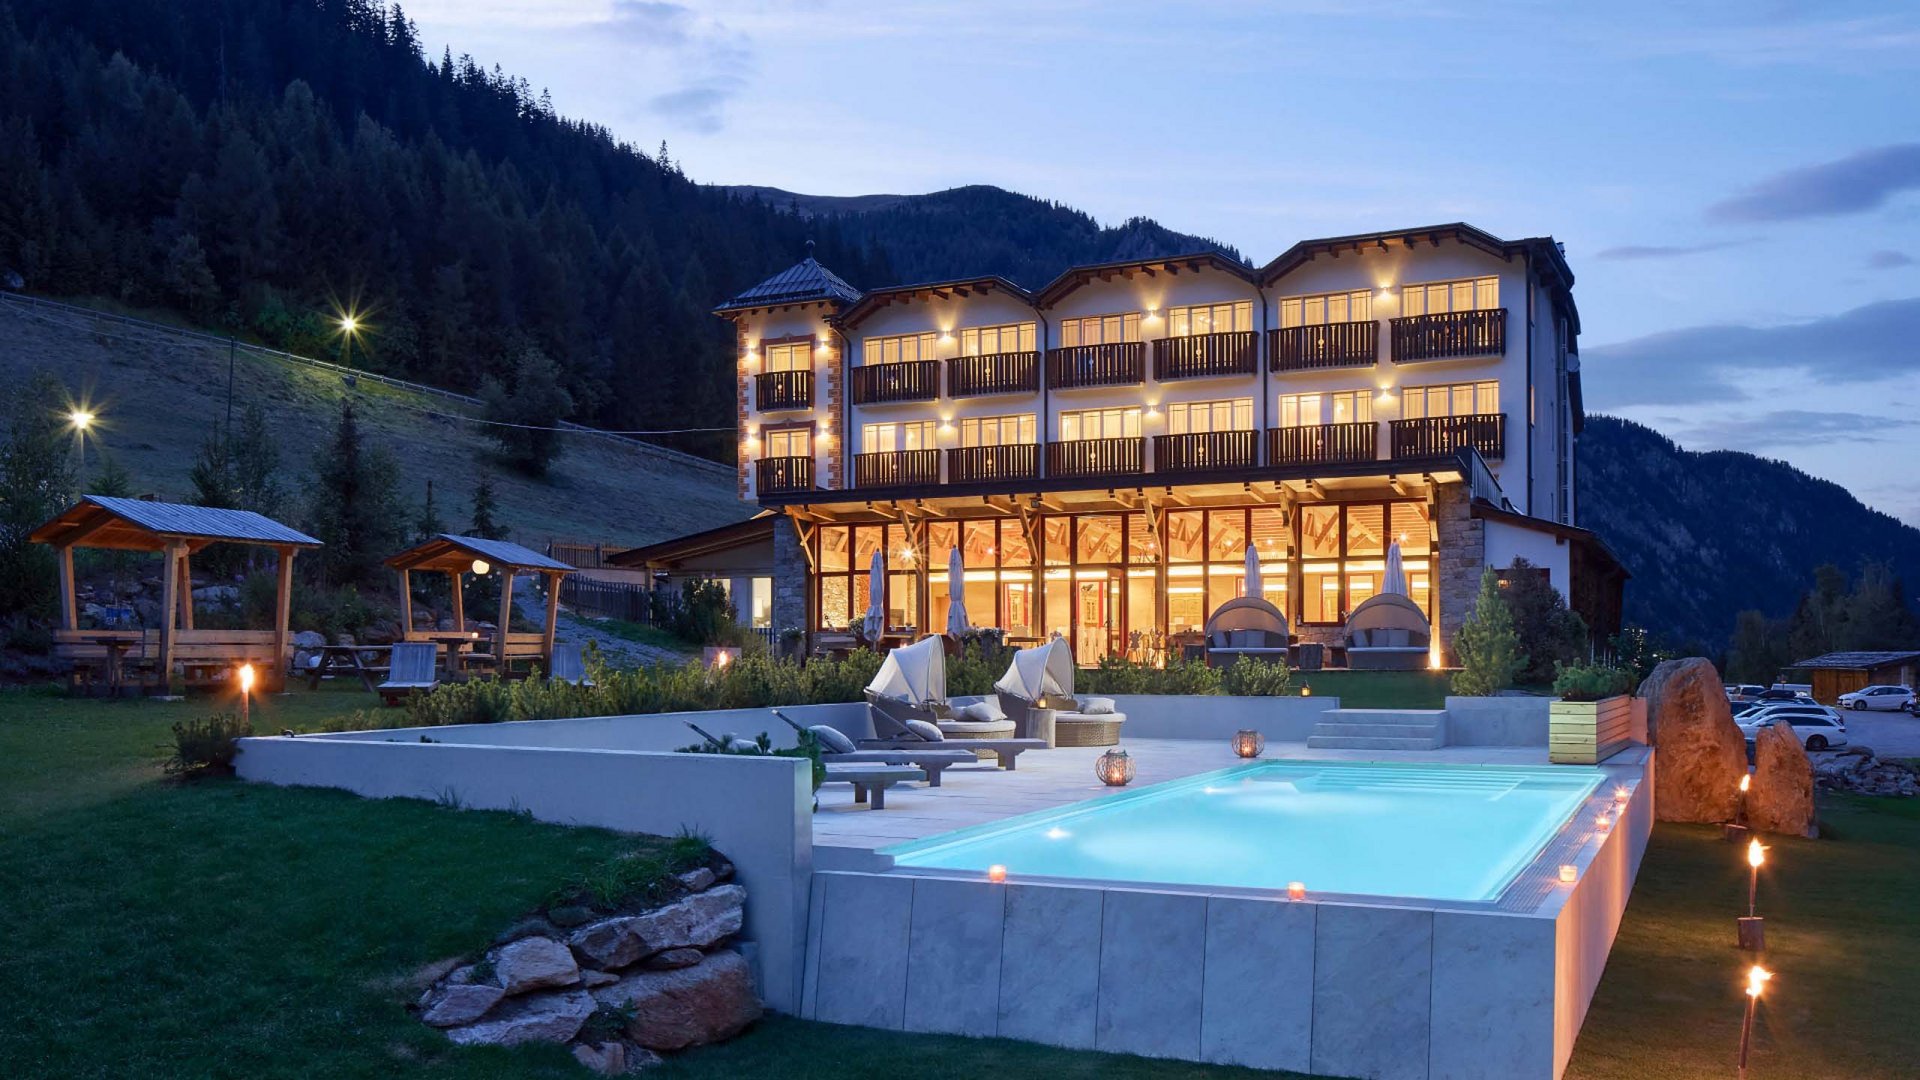 Evening view of Hotel Bella Vista with an illuminated outdoor pool in the foreground, surrounded by the picturesque South Tyrolean mountain scenery, creating a peaceful and relaxing atmosphere.